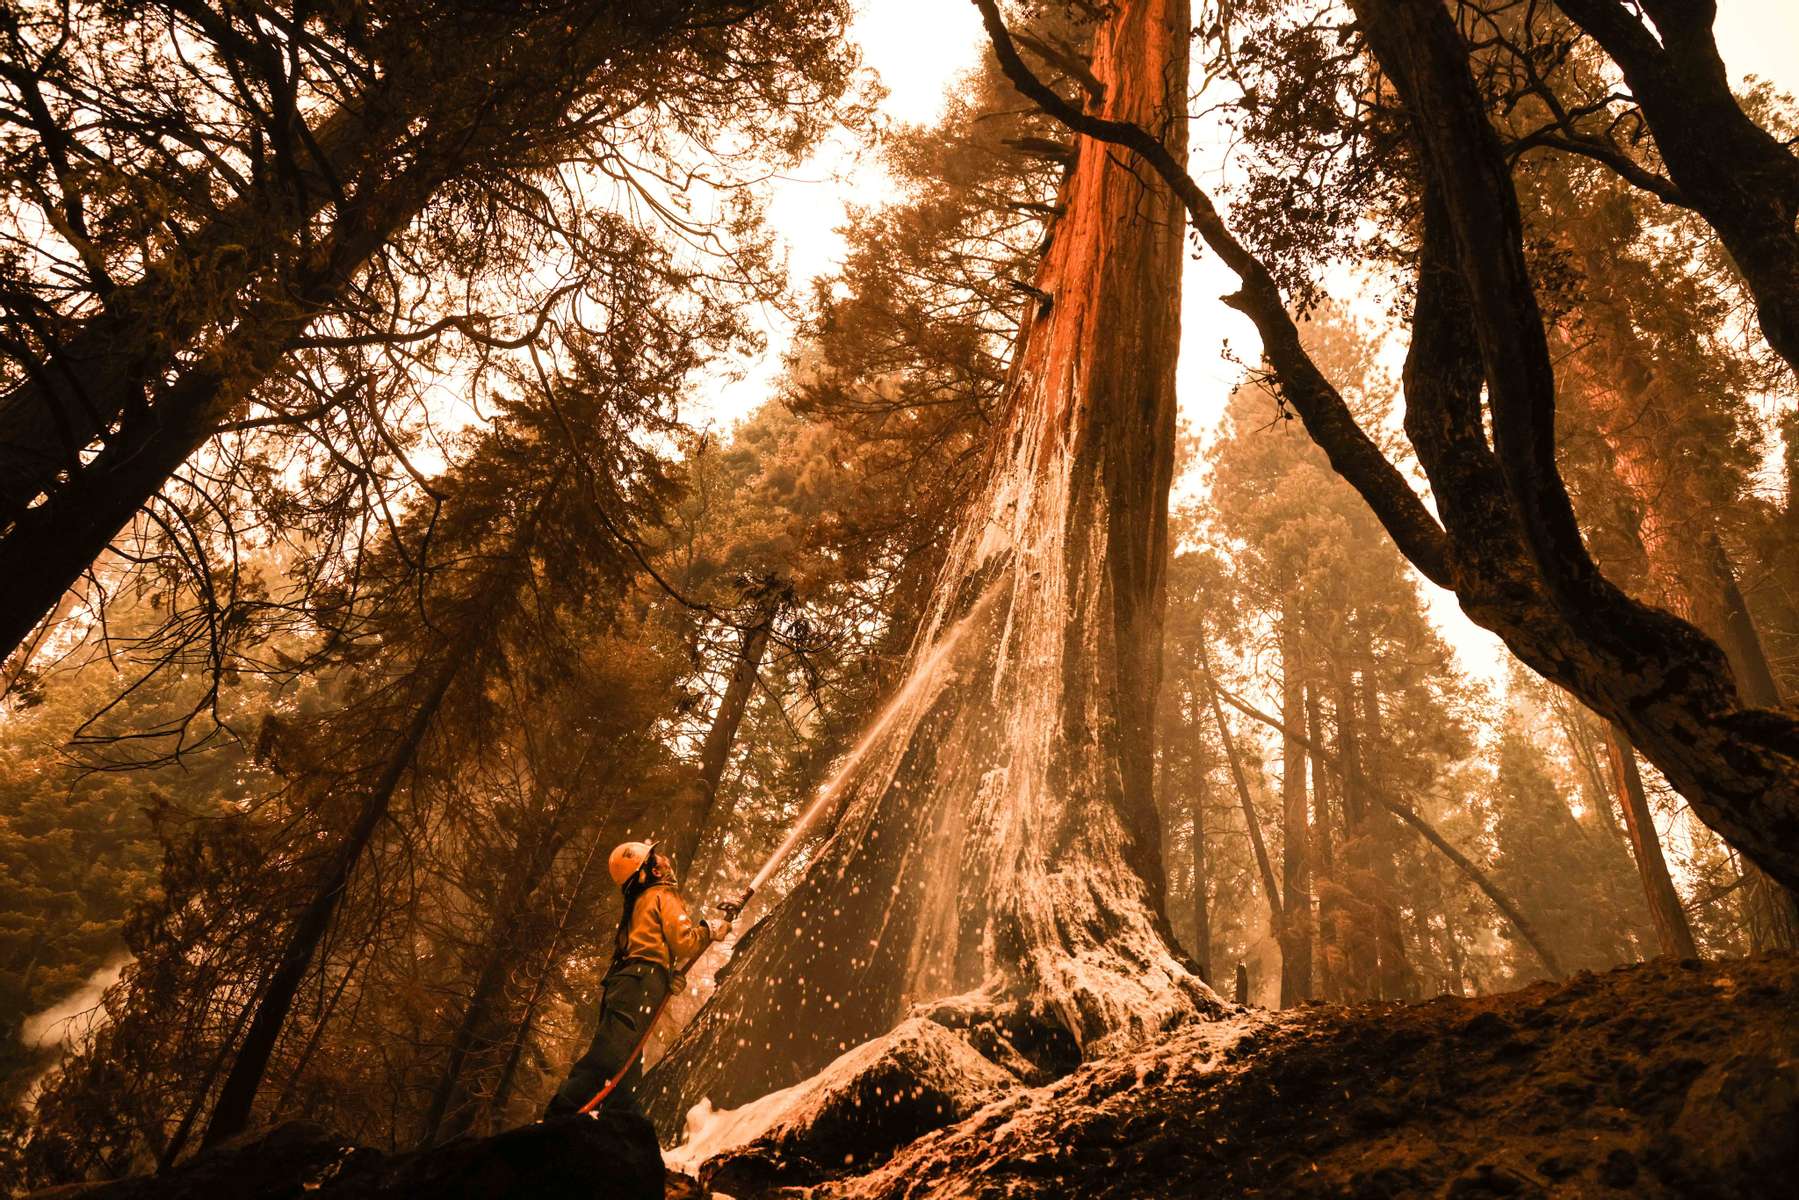 A firefighter sprays a mix of foam and water to extinguish a fire burning inside a hundred years old cedar tree.as the Caldor fire rages near by on August 27, 2021, in the Eldorado National forest, California. The Caldor Fire has burned over 165,000 acres, destroyed over 660 structures and is currently 14 percent contained. 